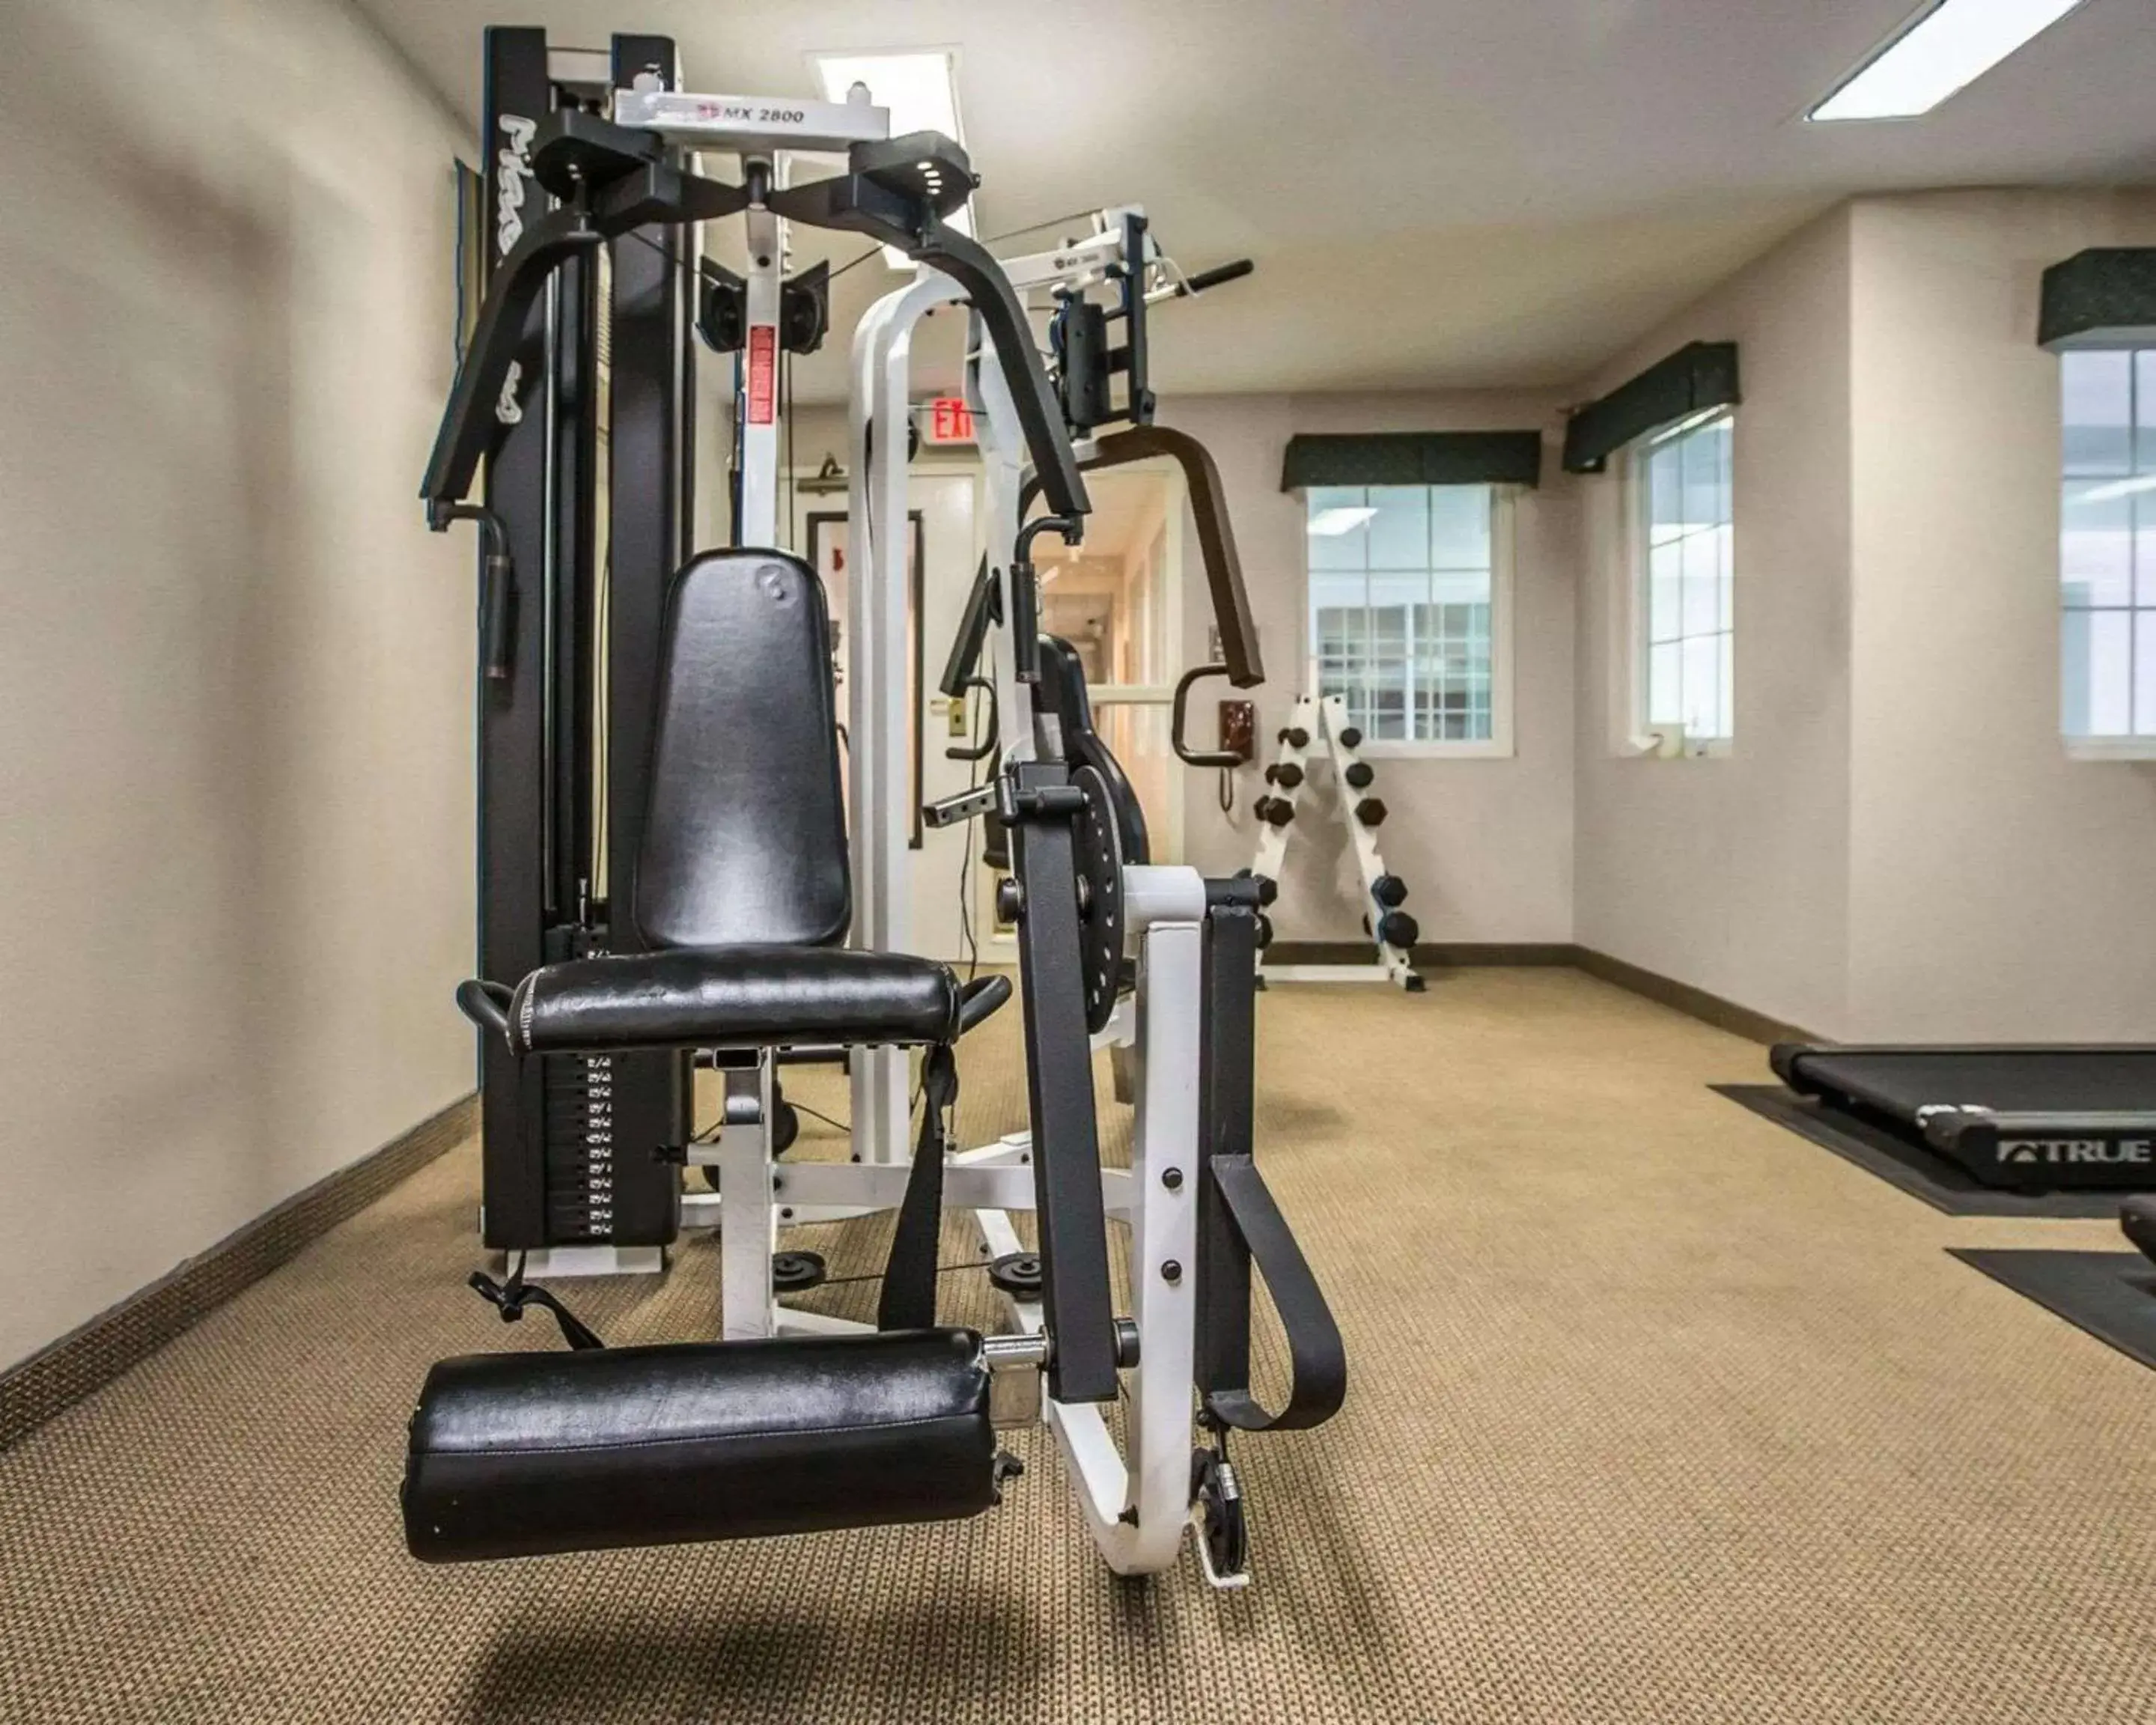 Fitness centre/facilities, Fitness Center/Facilities in Quality Inn & Suites Dixon near I-88